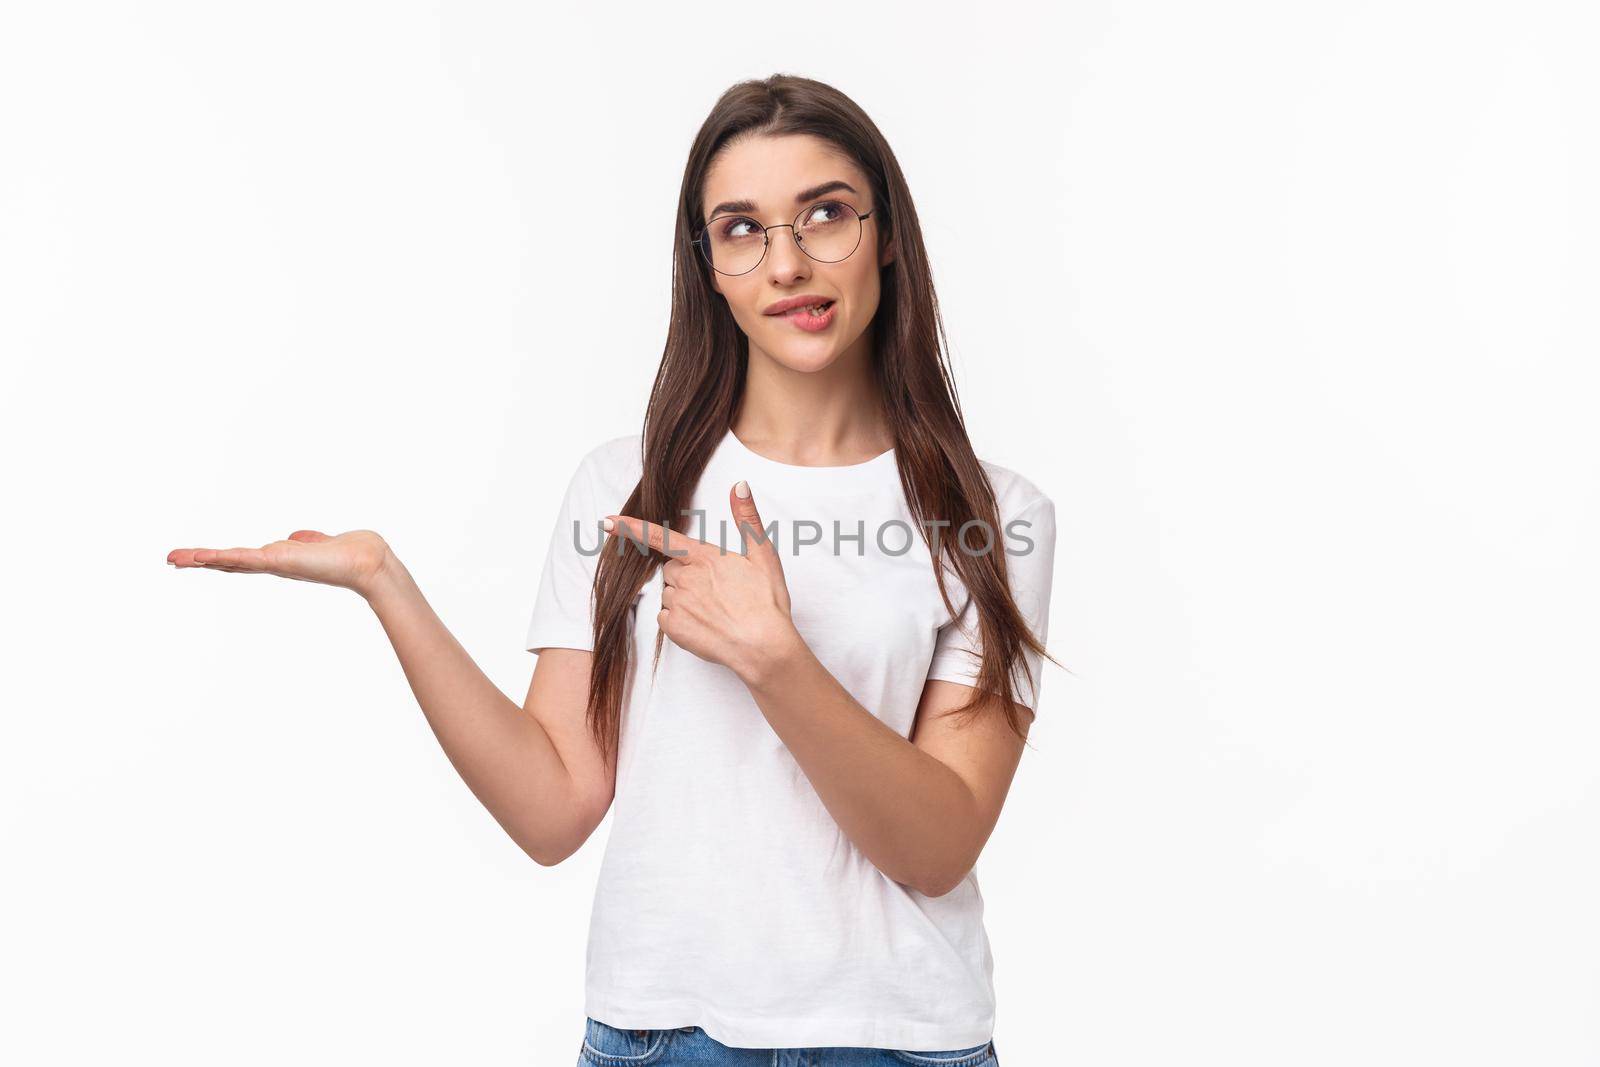 Waist-up portrait of thoughtful, pretty young woman holding arm as if have something lying in it, pointing at product with pondering face, bite lip look up thinking, white background.